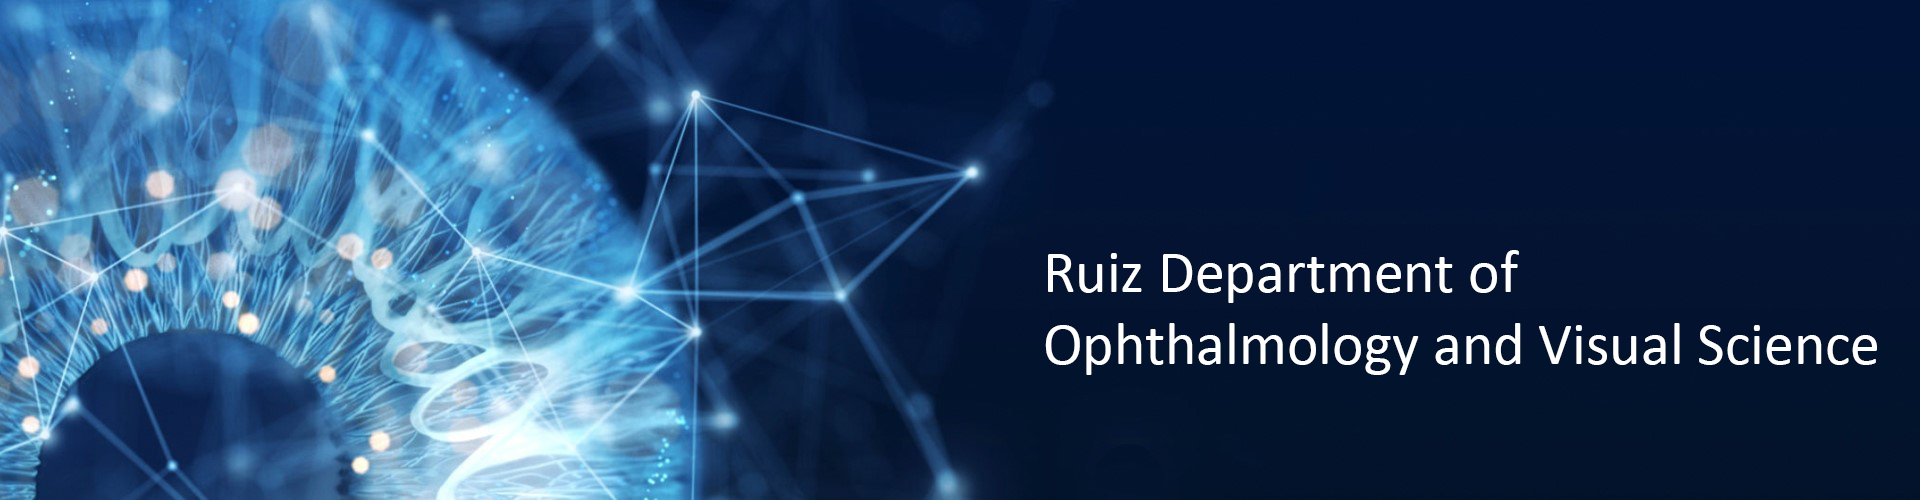 Ruiz Department of Ophthalmology and Visual Science